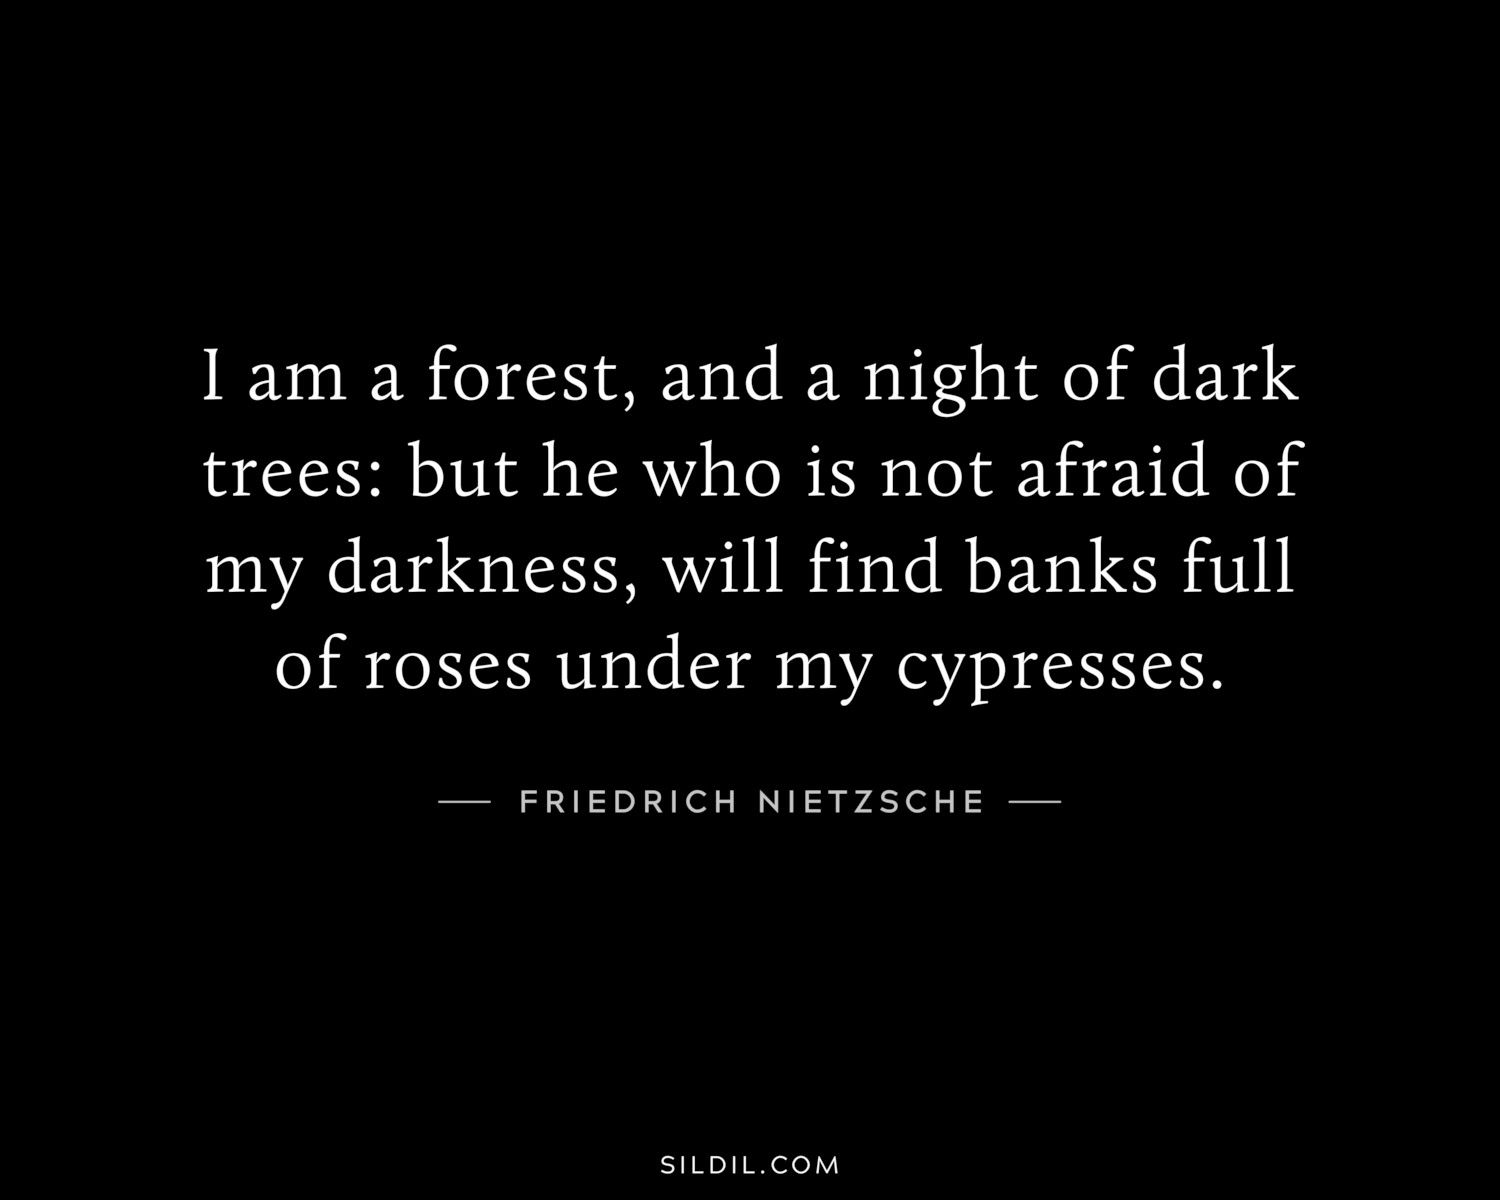 I am a forest, and a night of dark trees: but he who is not afraid of my darkness, will find banks full of roses under my cypresses.